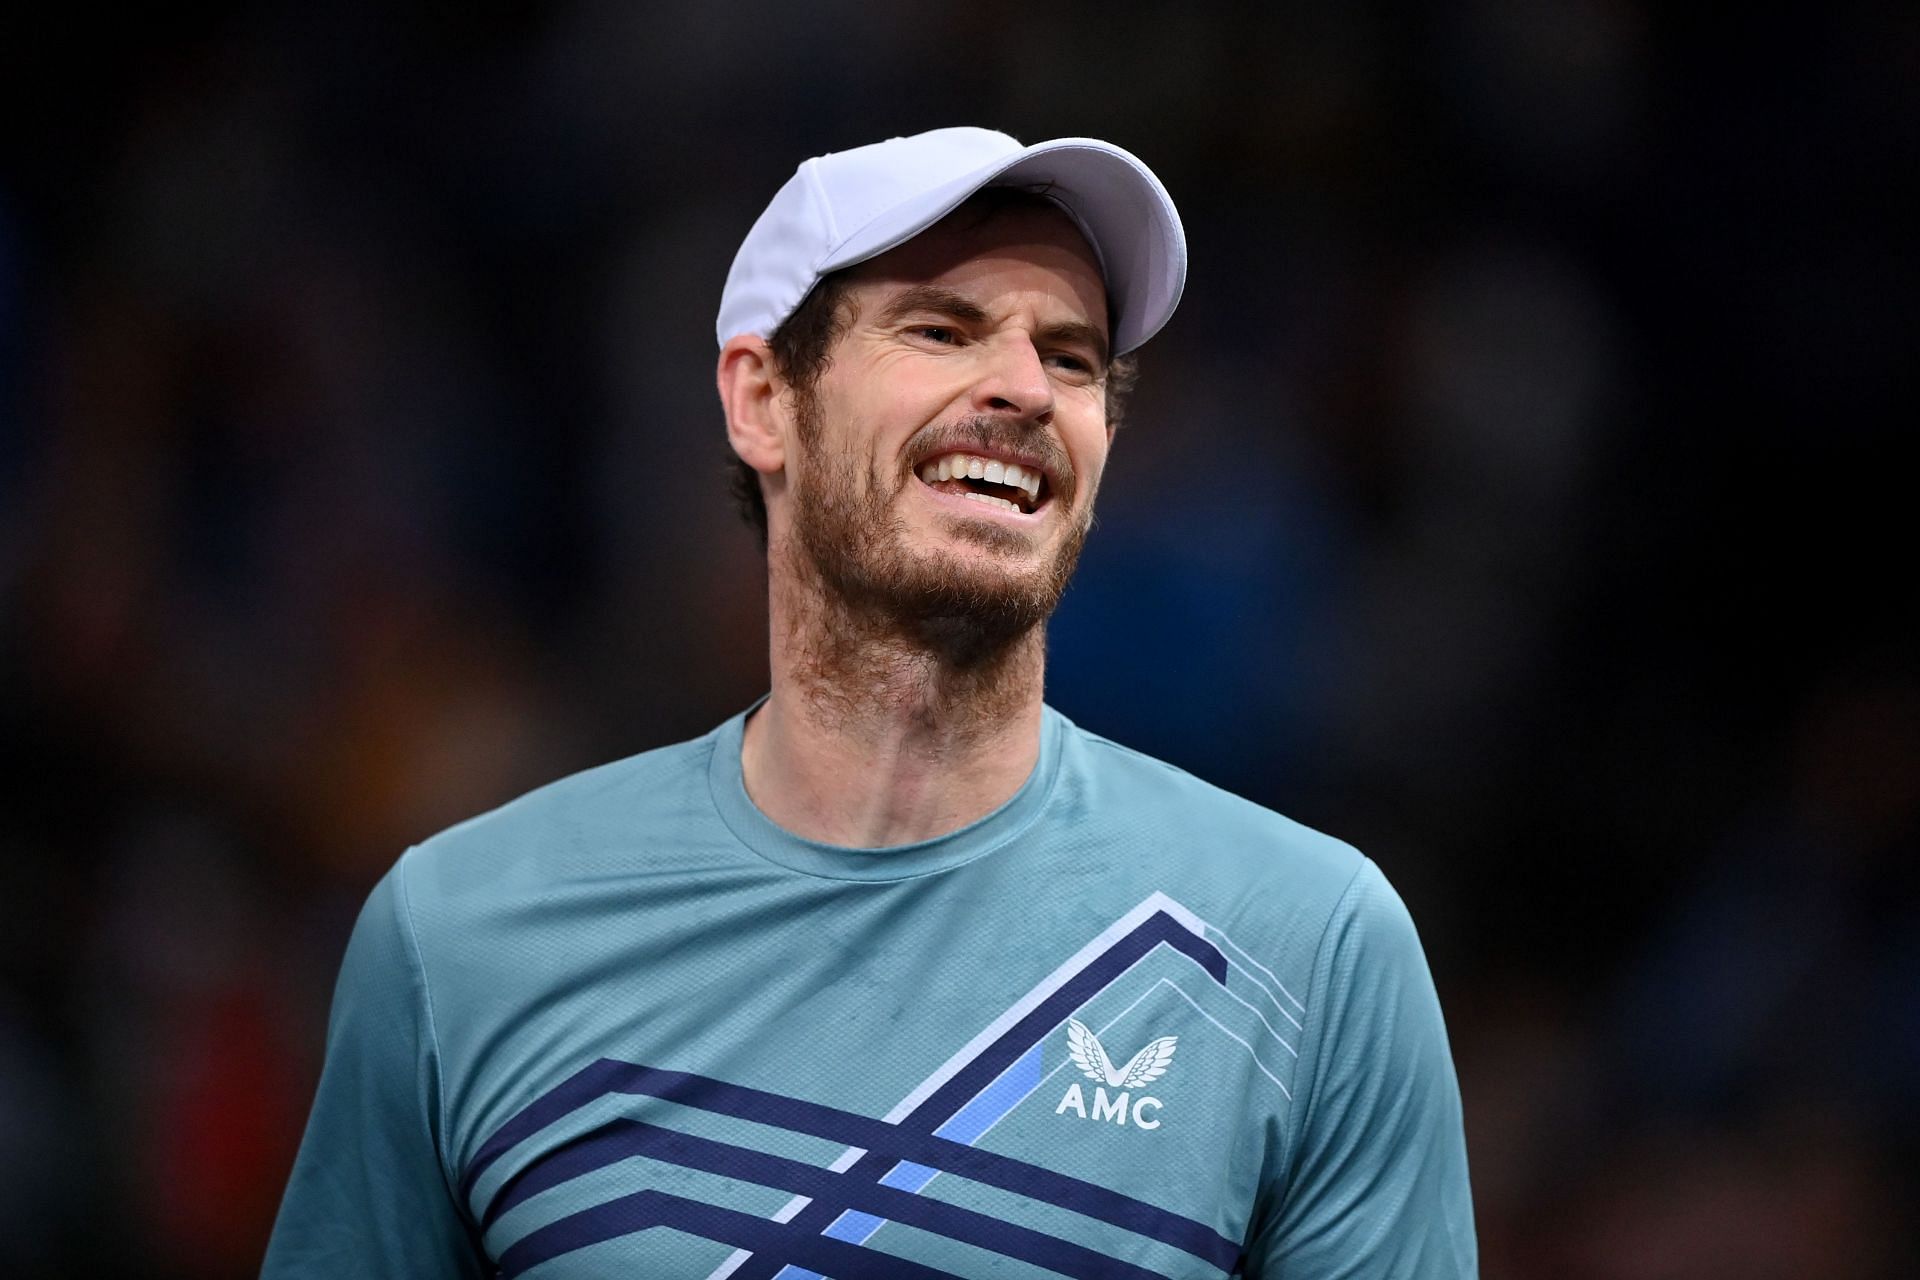 Murray made a first-round exit at the Citi Open